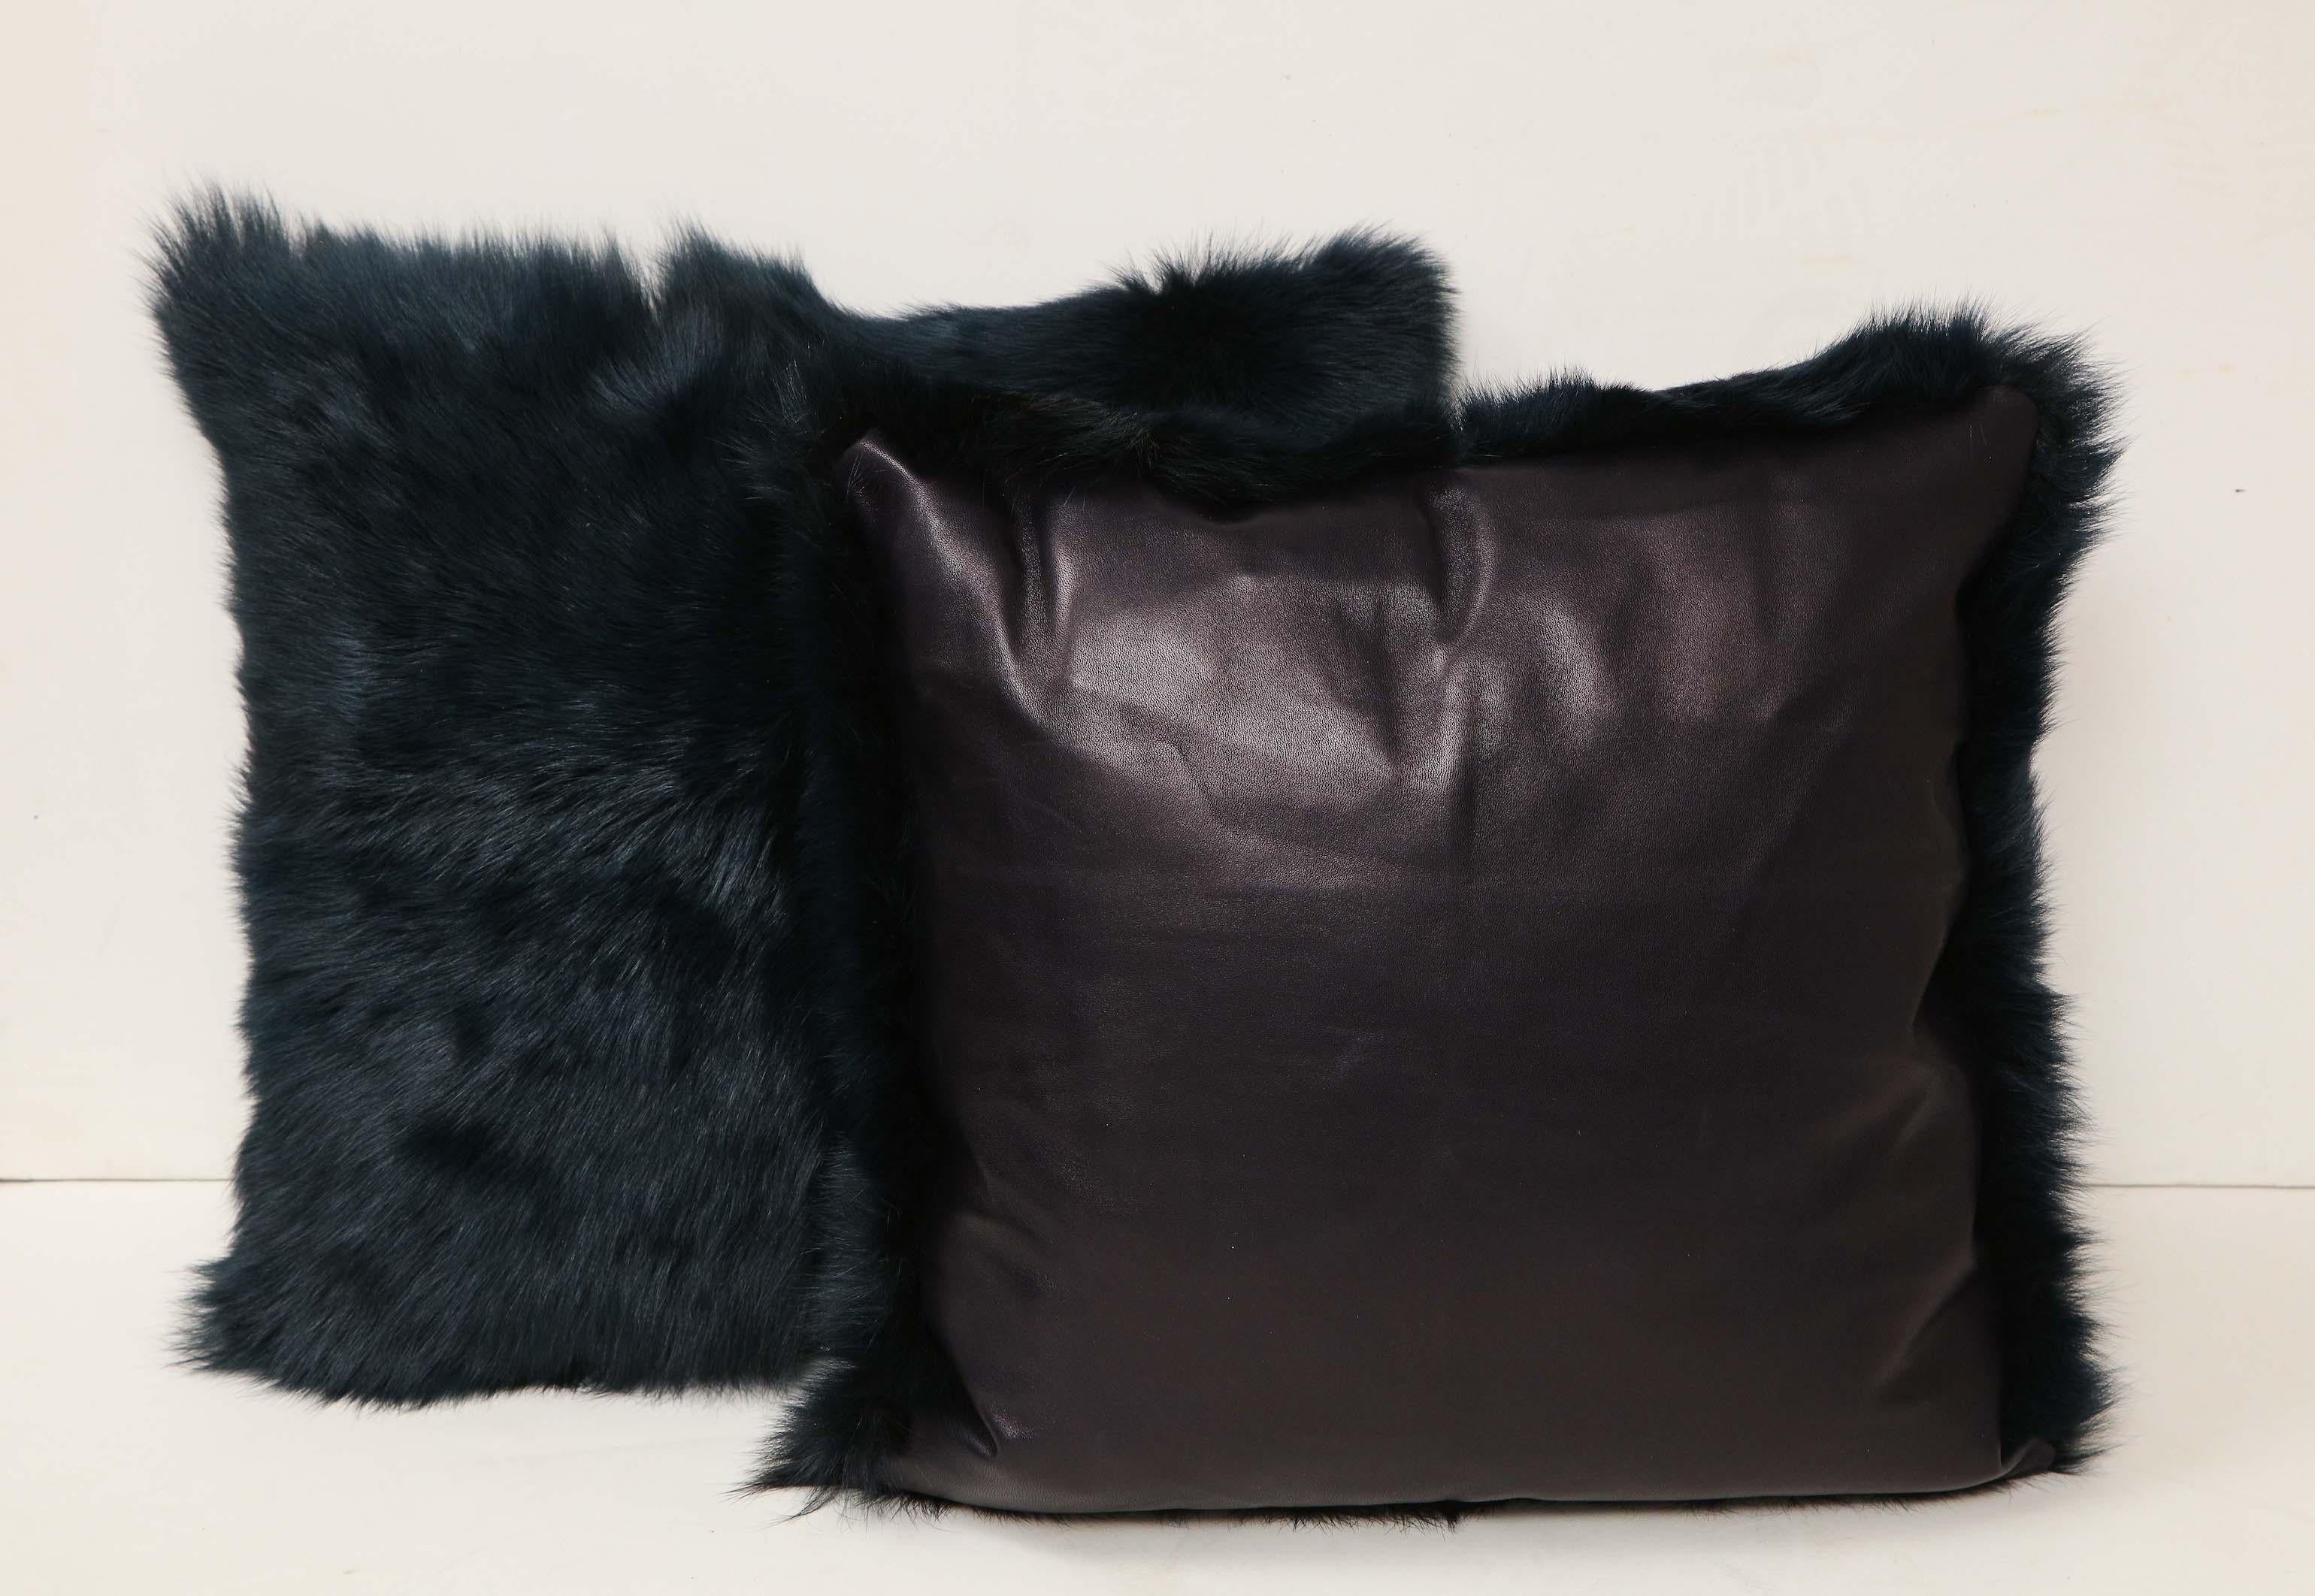 American Toscana Long Hair Shearling Pillow in Deep Forest Color For Sale